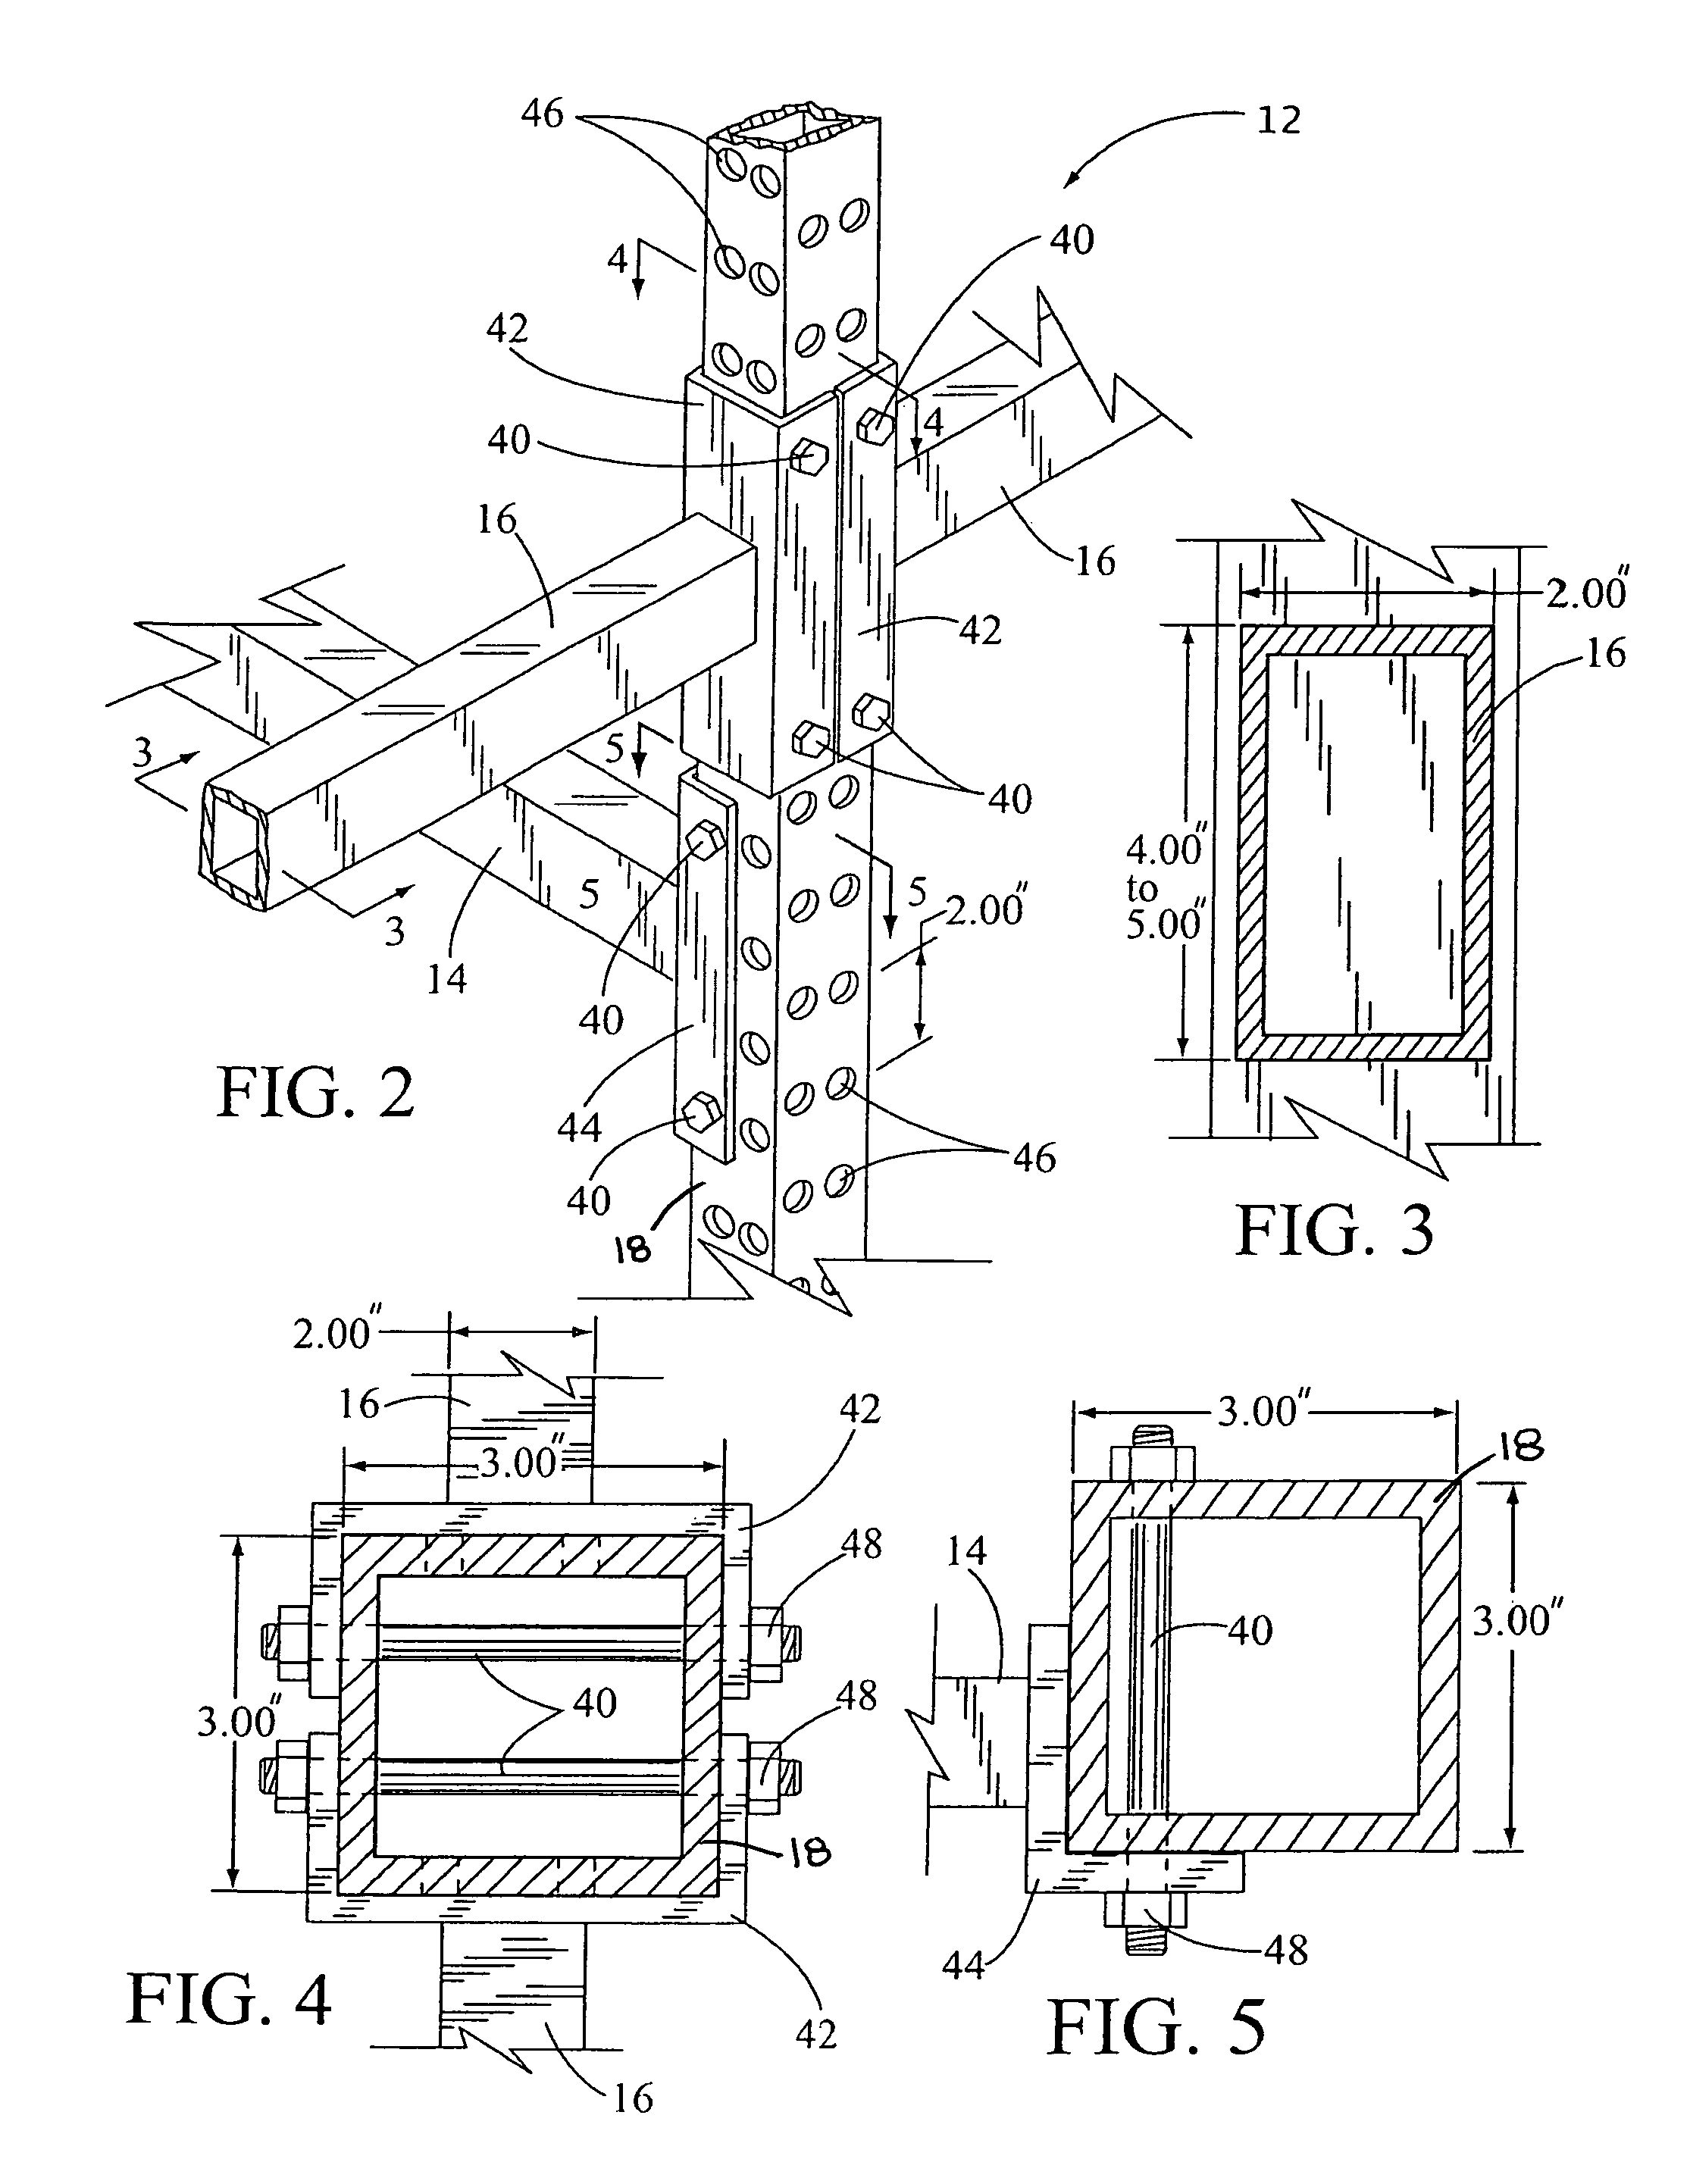 Storage rack, flexible moment frame for reducing seismic damage to stored goods